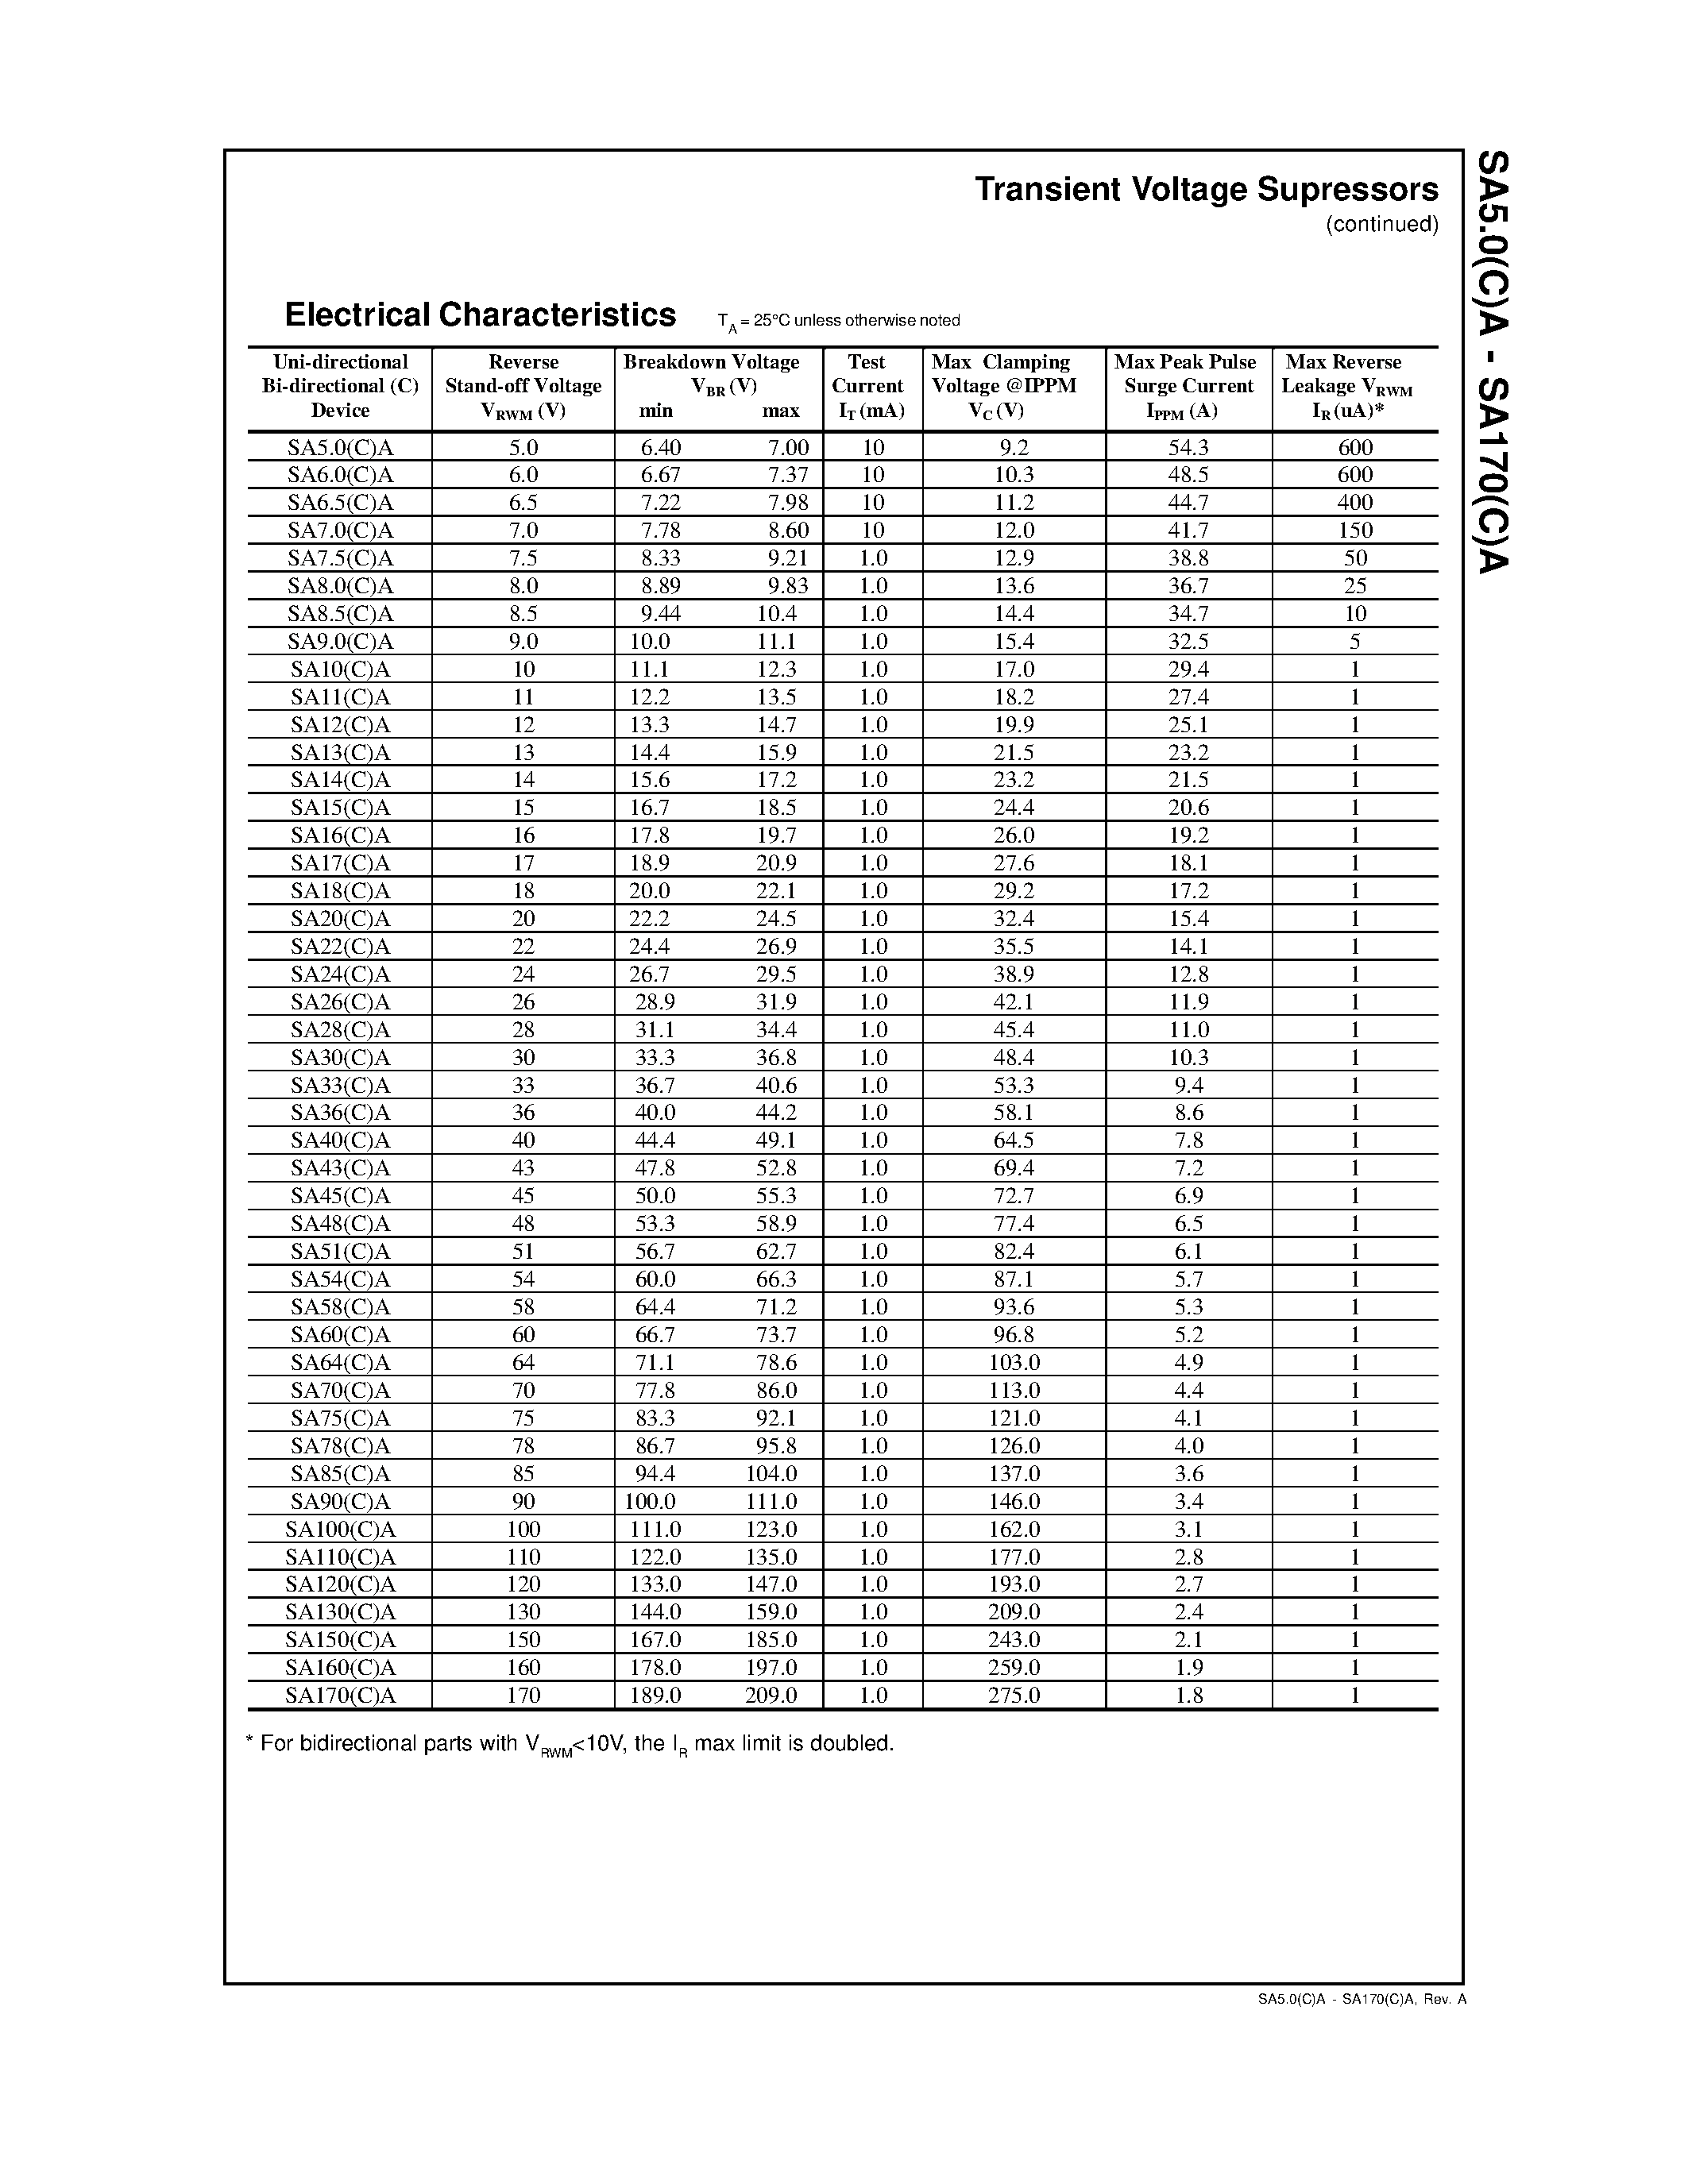 Datasheet SA28(C)A - DEVICES FOR BIPOLAR APPLICATIONS page 2